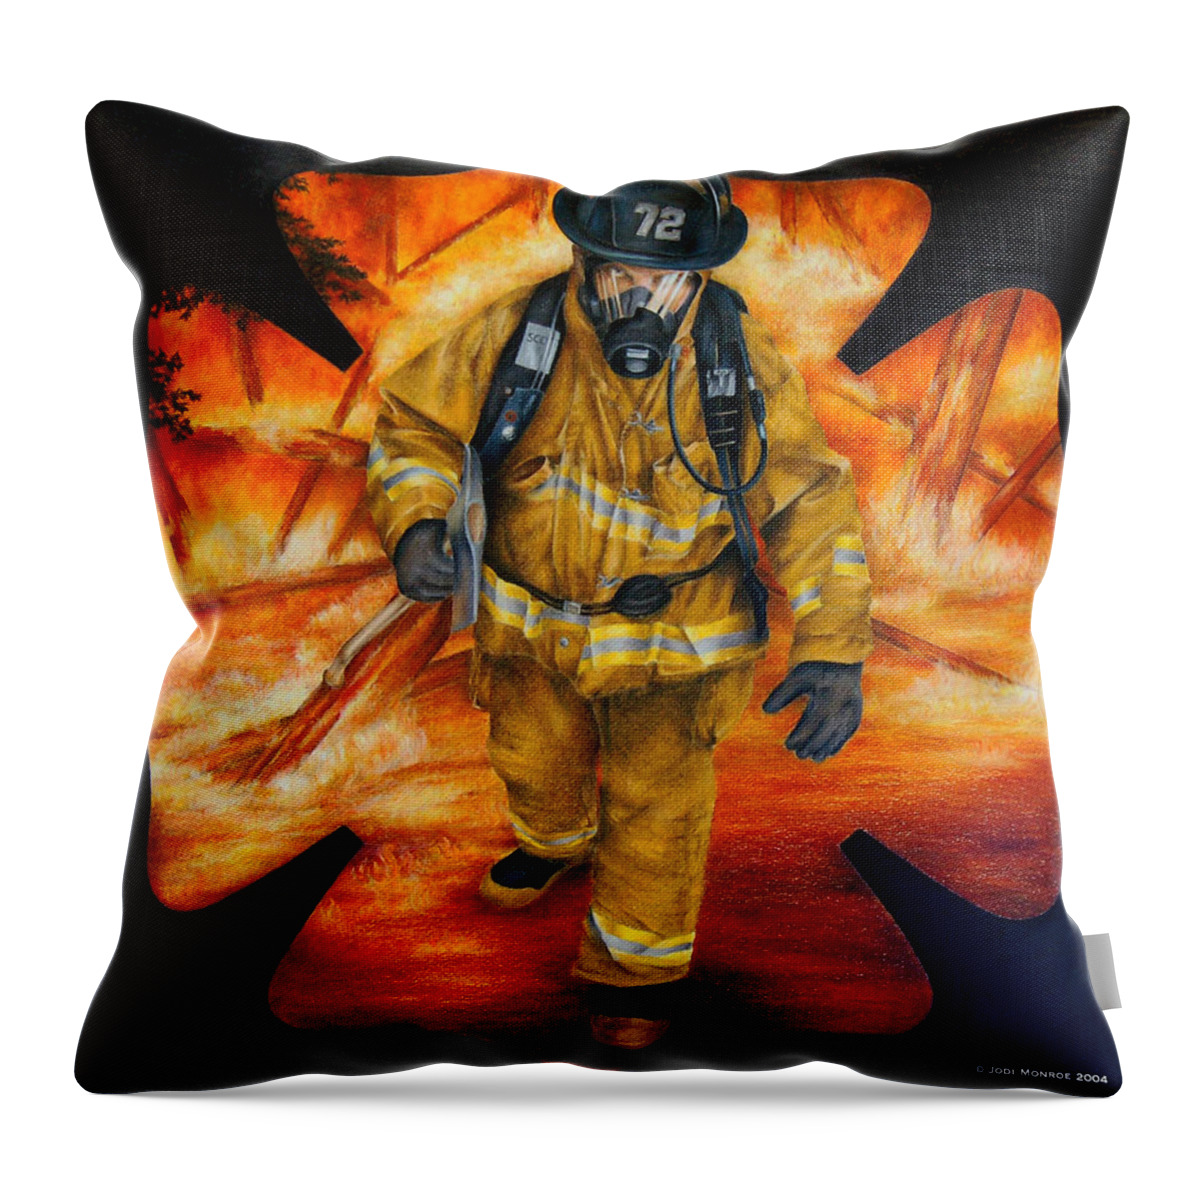 Firefighter Throw Pillow featuring the drawing Walking Out by Jodi Monroe